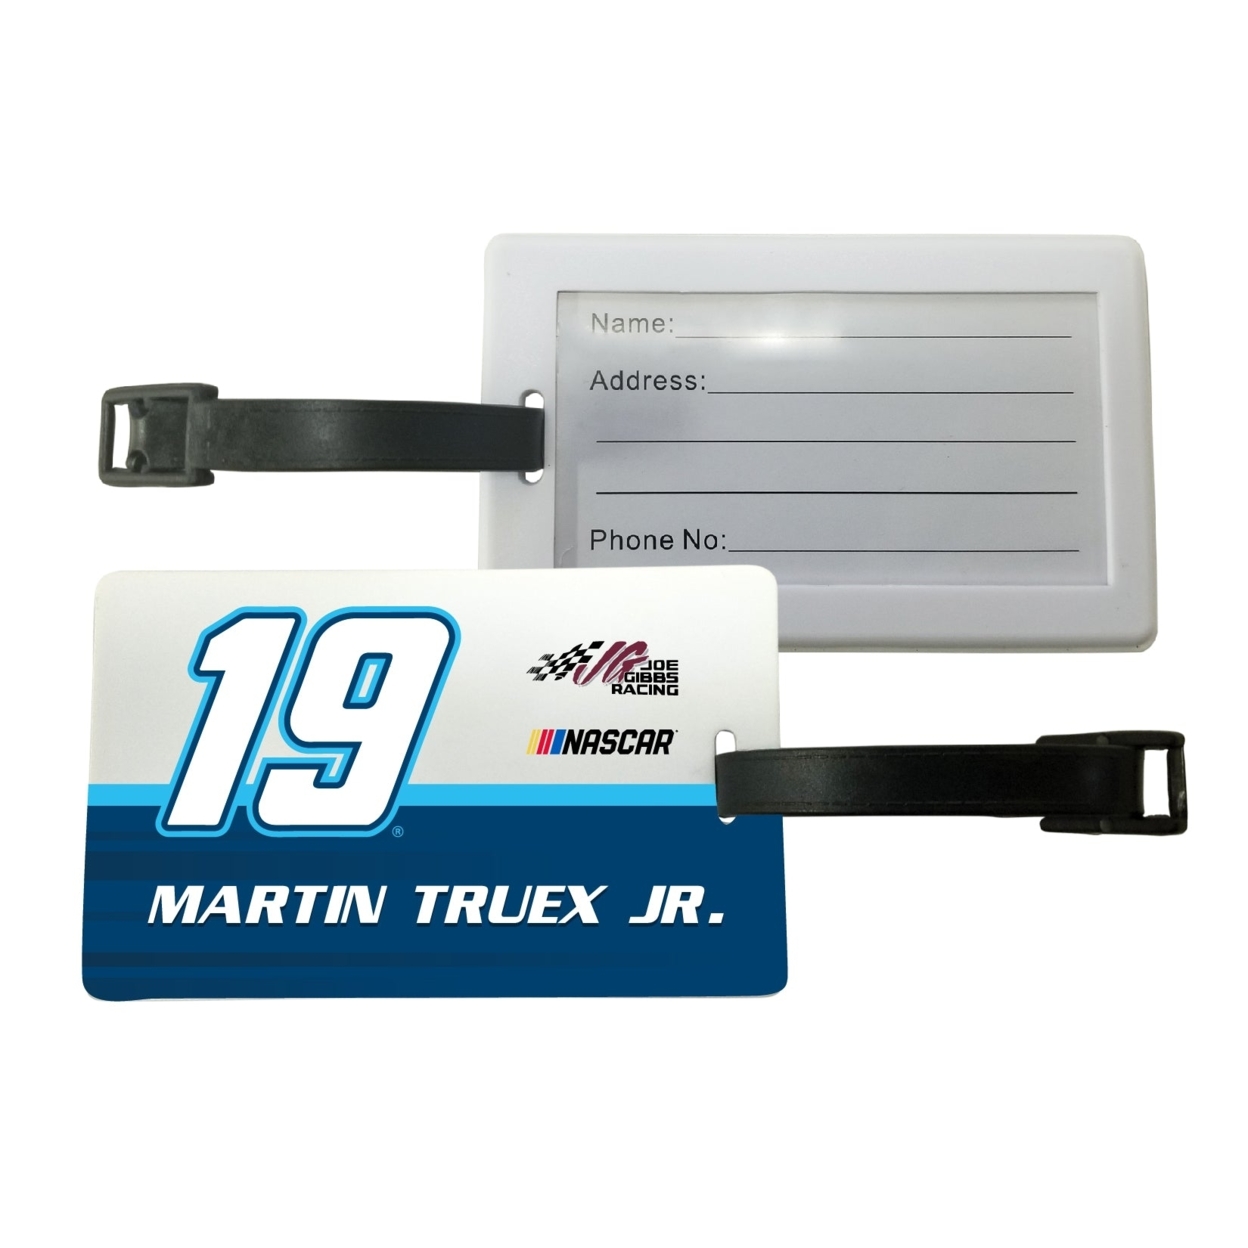 #19 Martin Truex Jr. Officially Licensed Luggage Tag